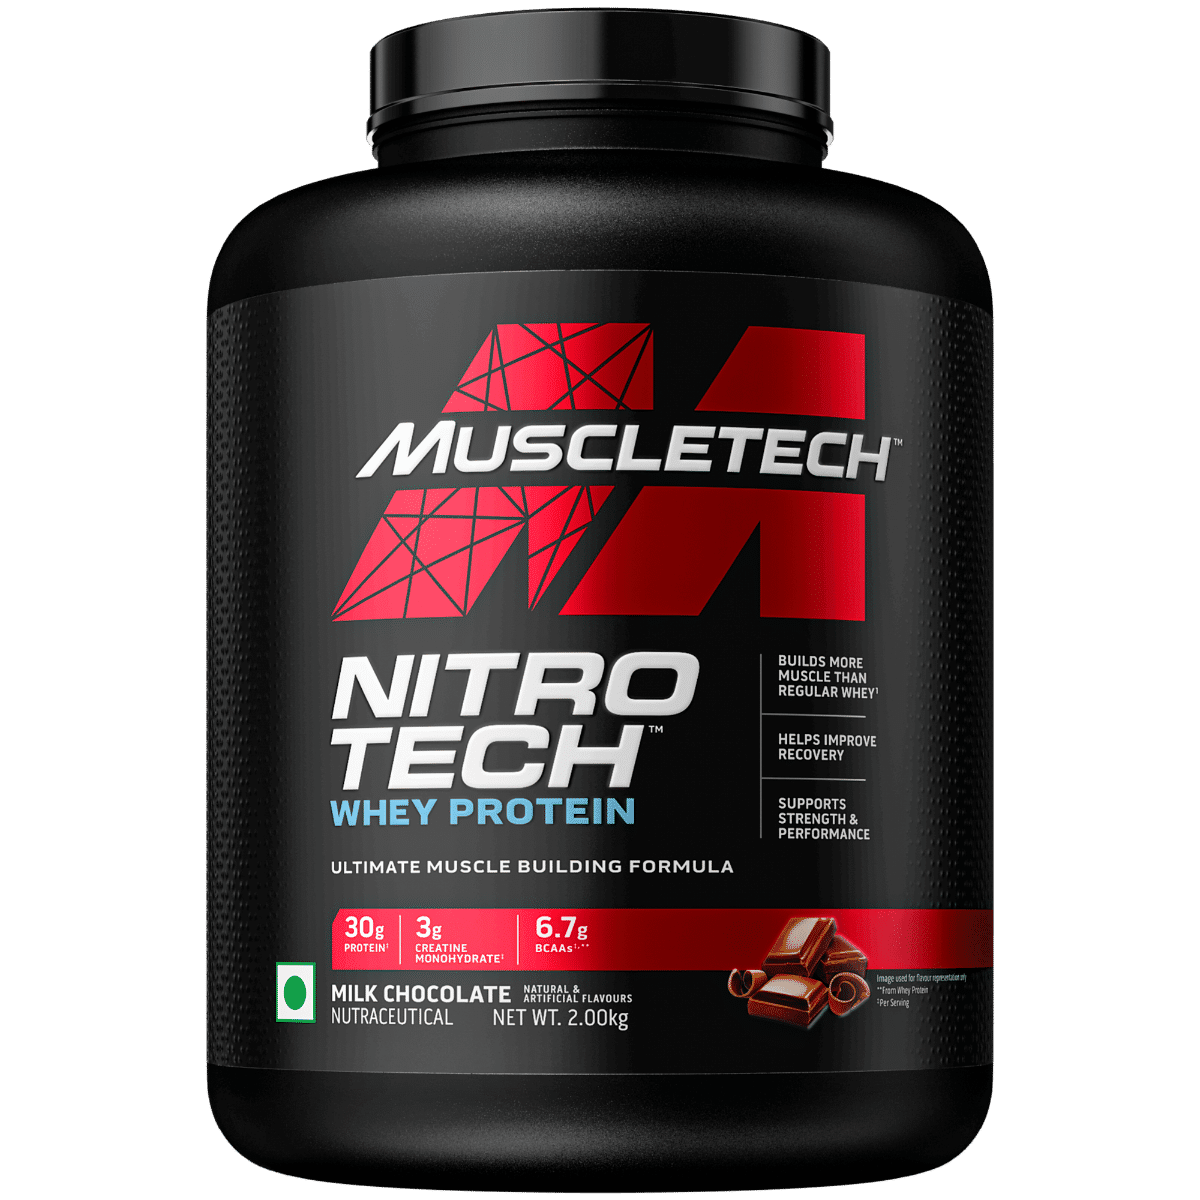 MuscleTech Nitrotech Whey Protein Milk Chocolate Flavour Powder, 2 kg, Pack of 1 